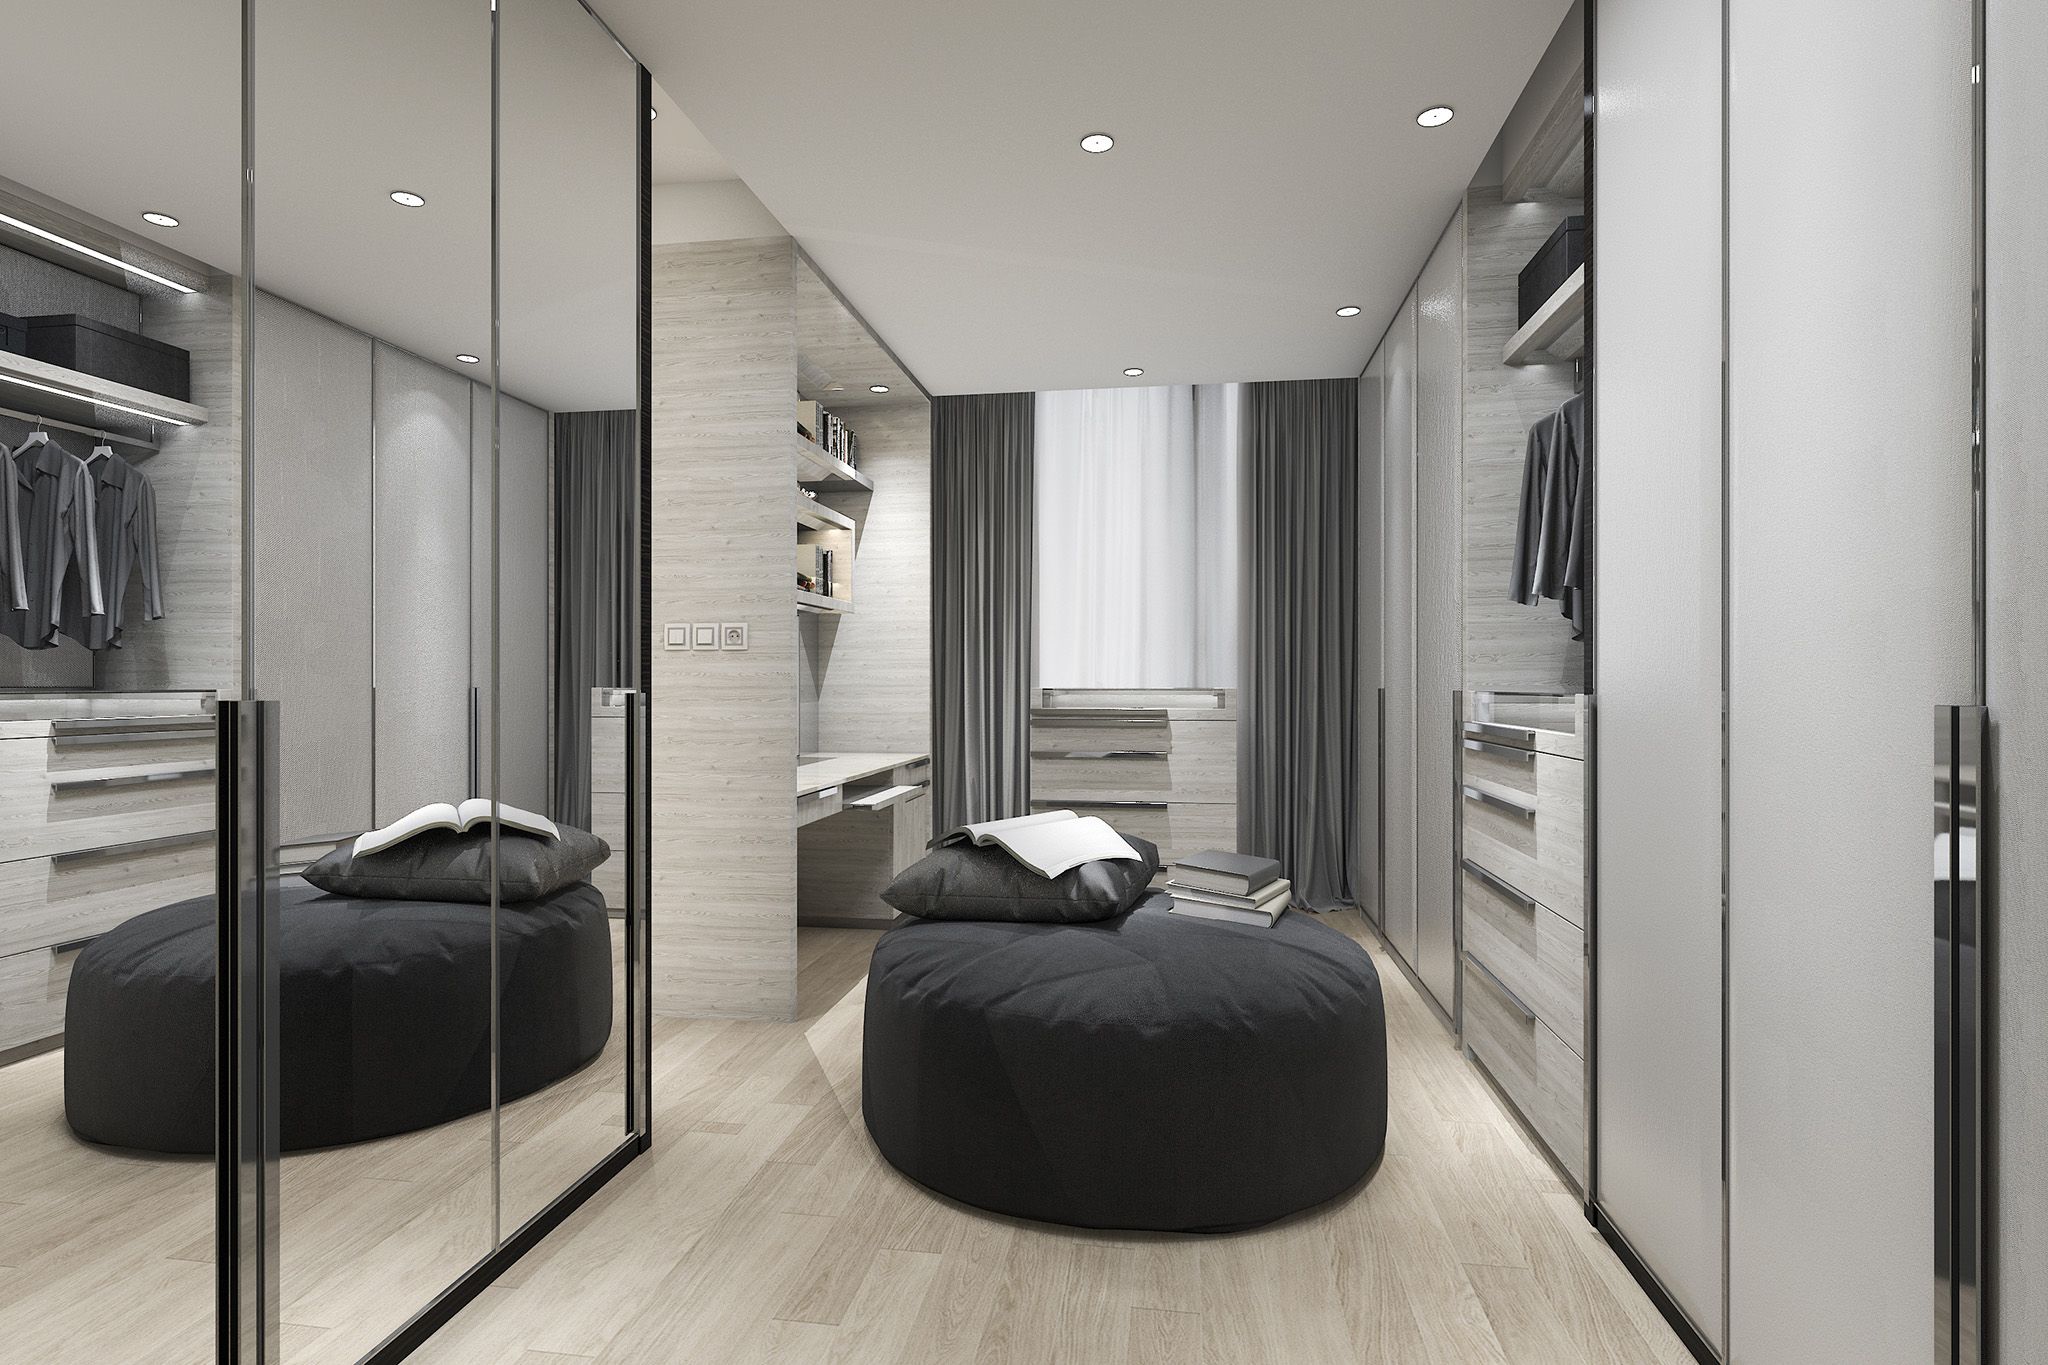 Fitted Wardrobes Ideas | Elegant Mirrored Wardrobe Designs Intended For Mirrored Wardrobes (View 15 of 20)